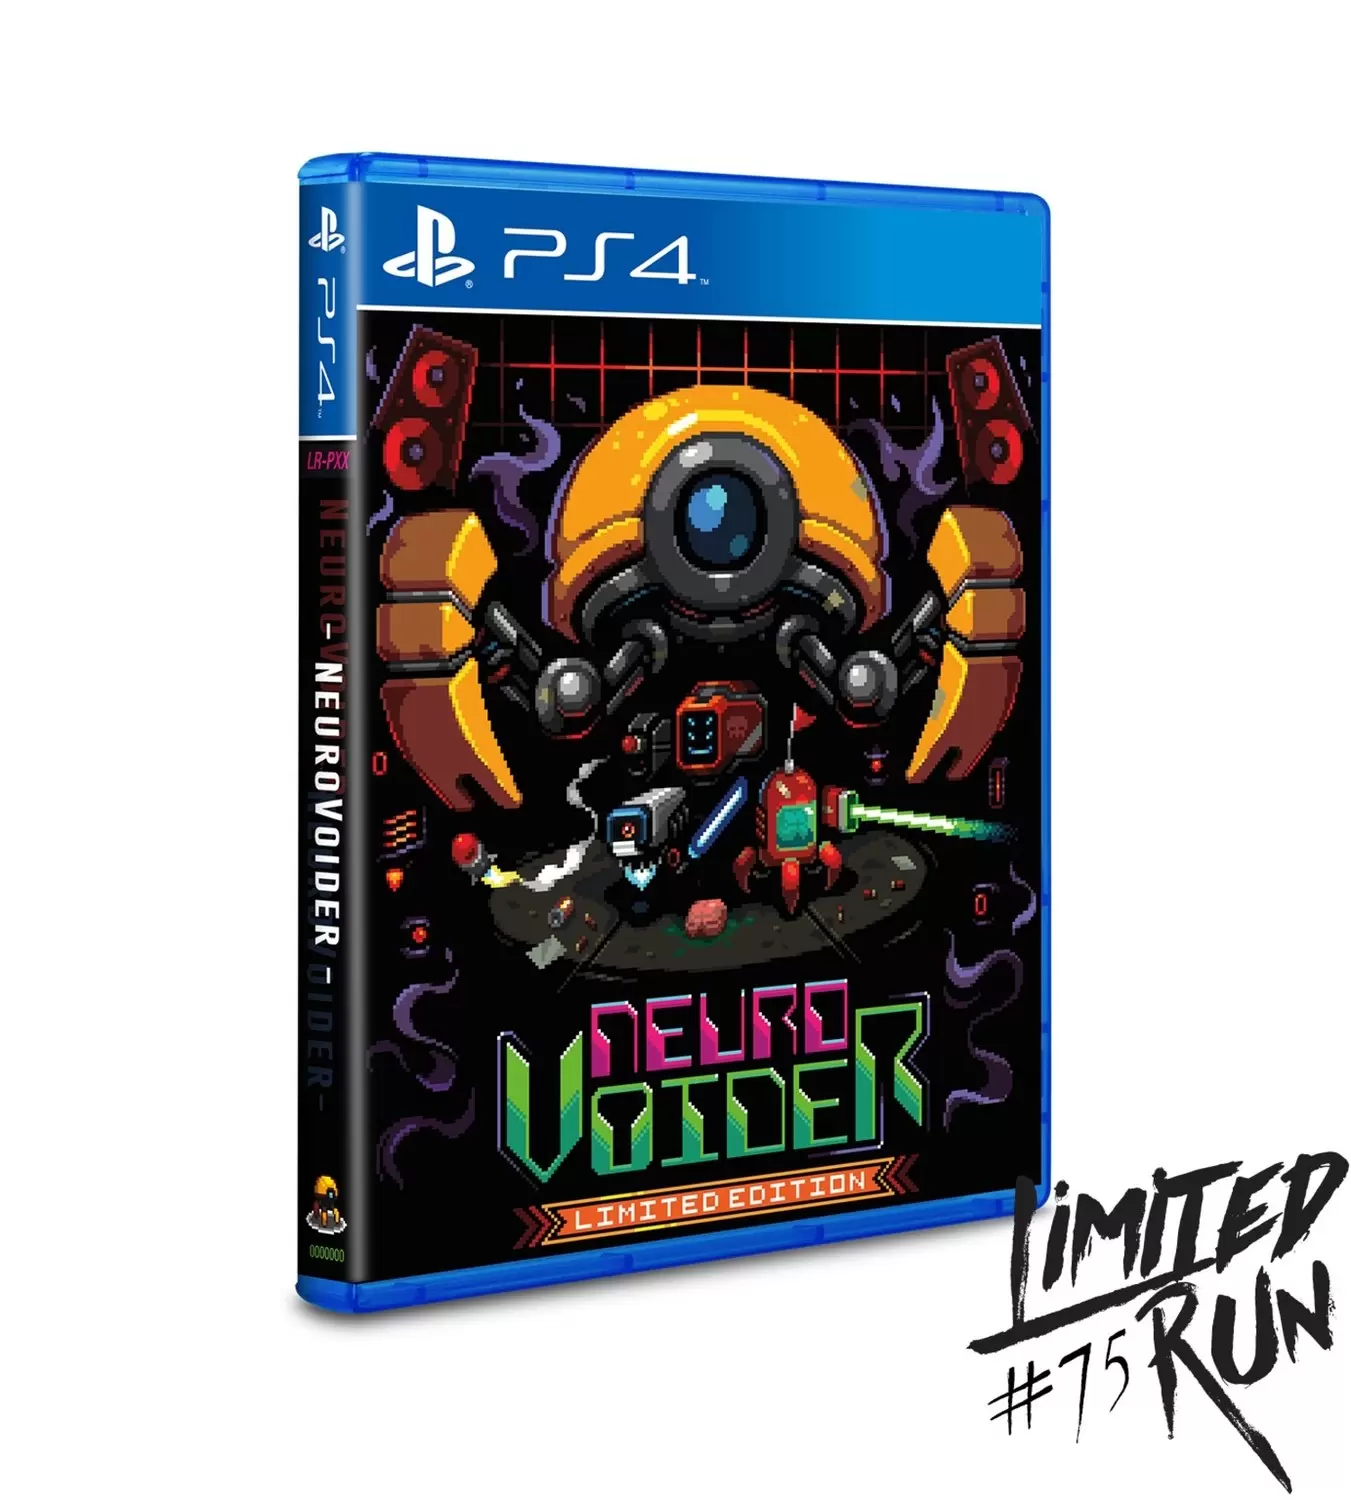 PS4 Games - Neurovoider